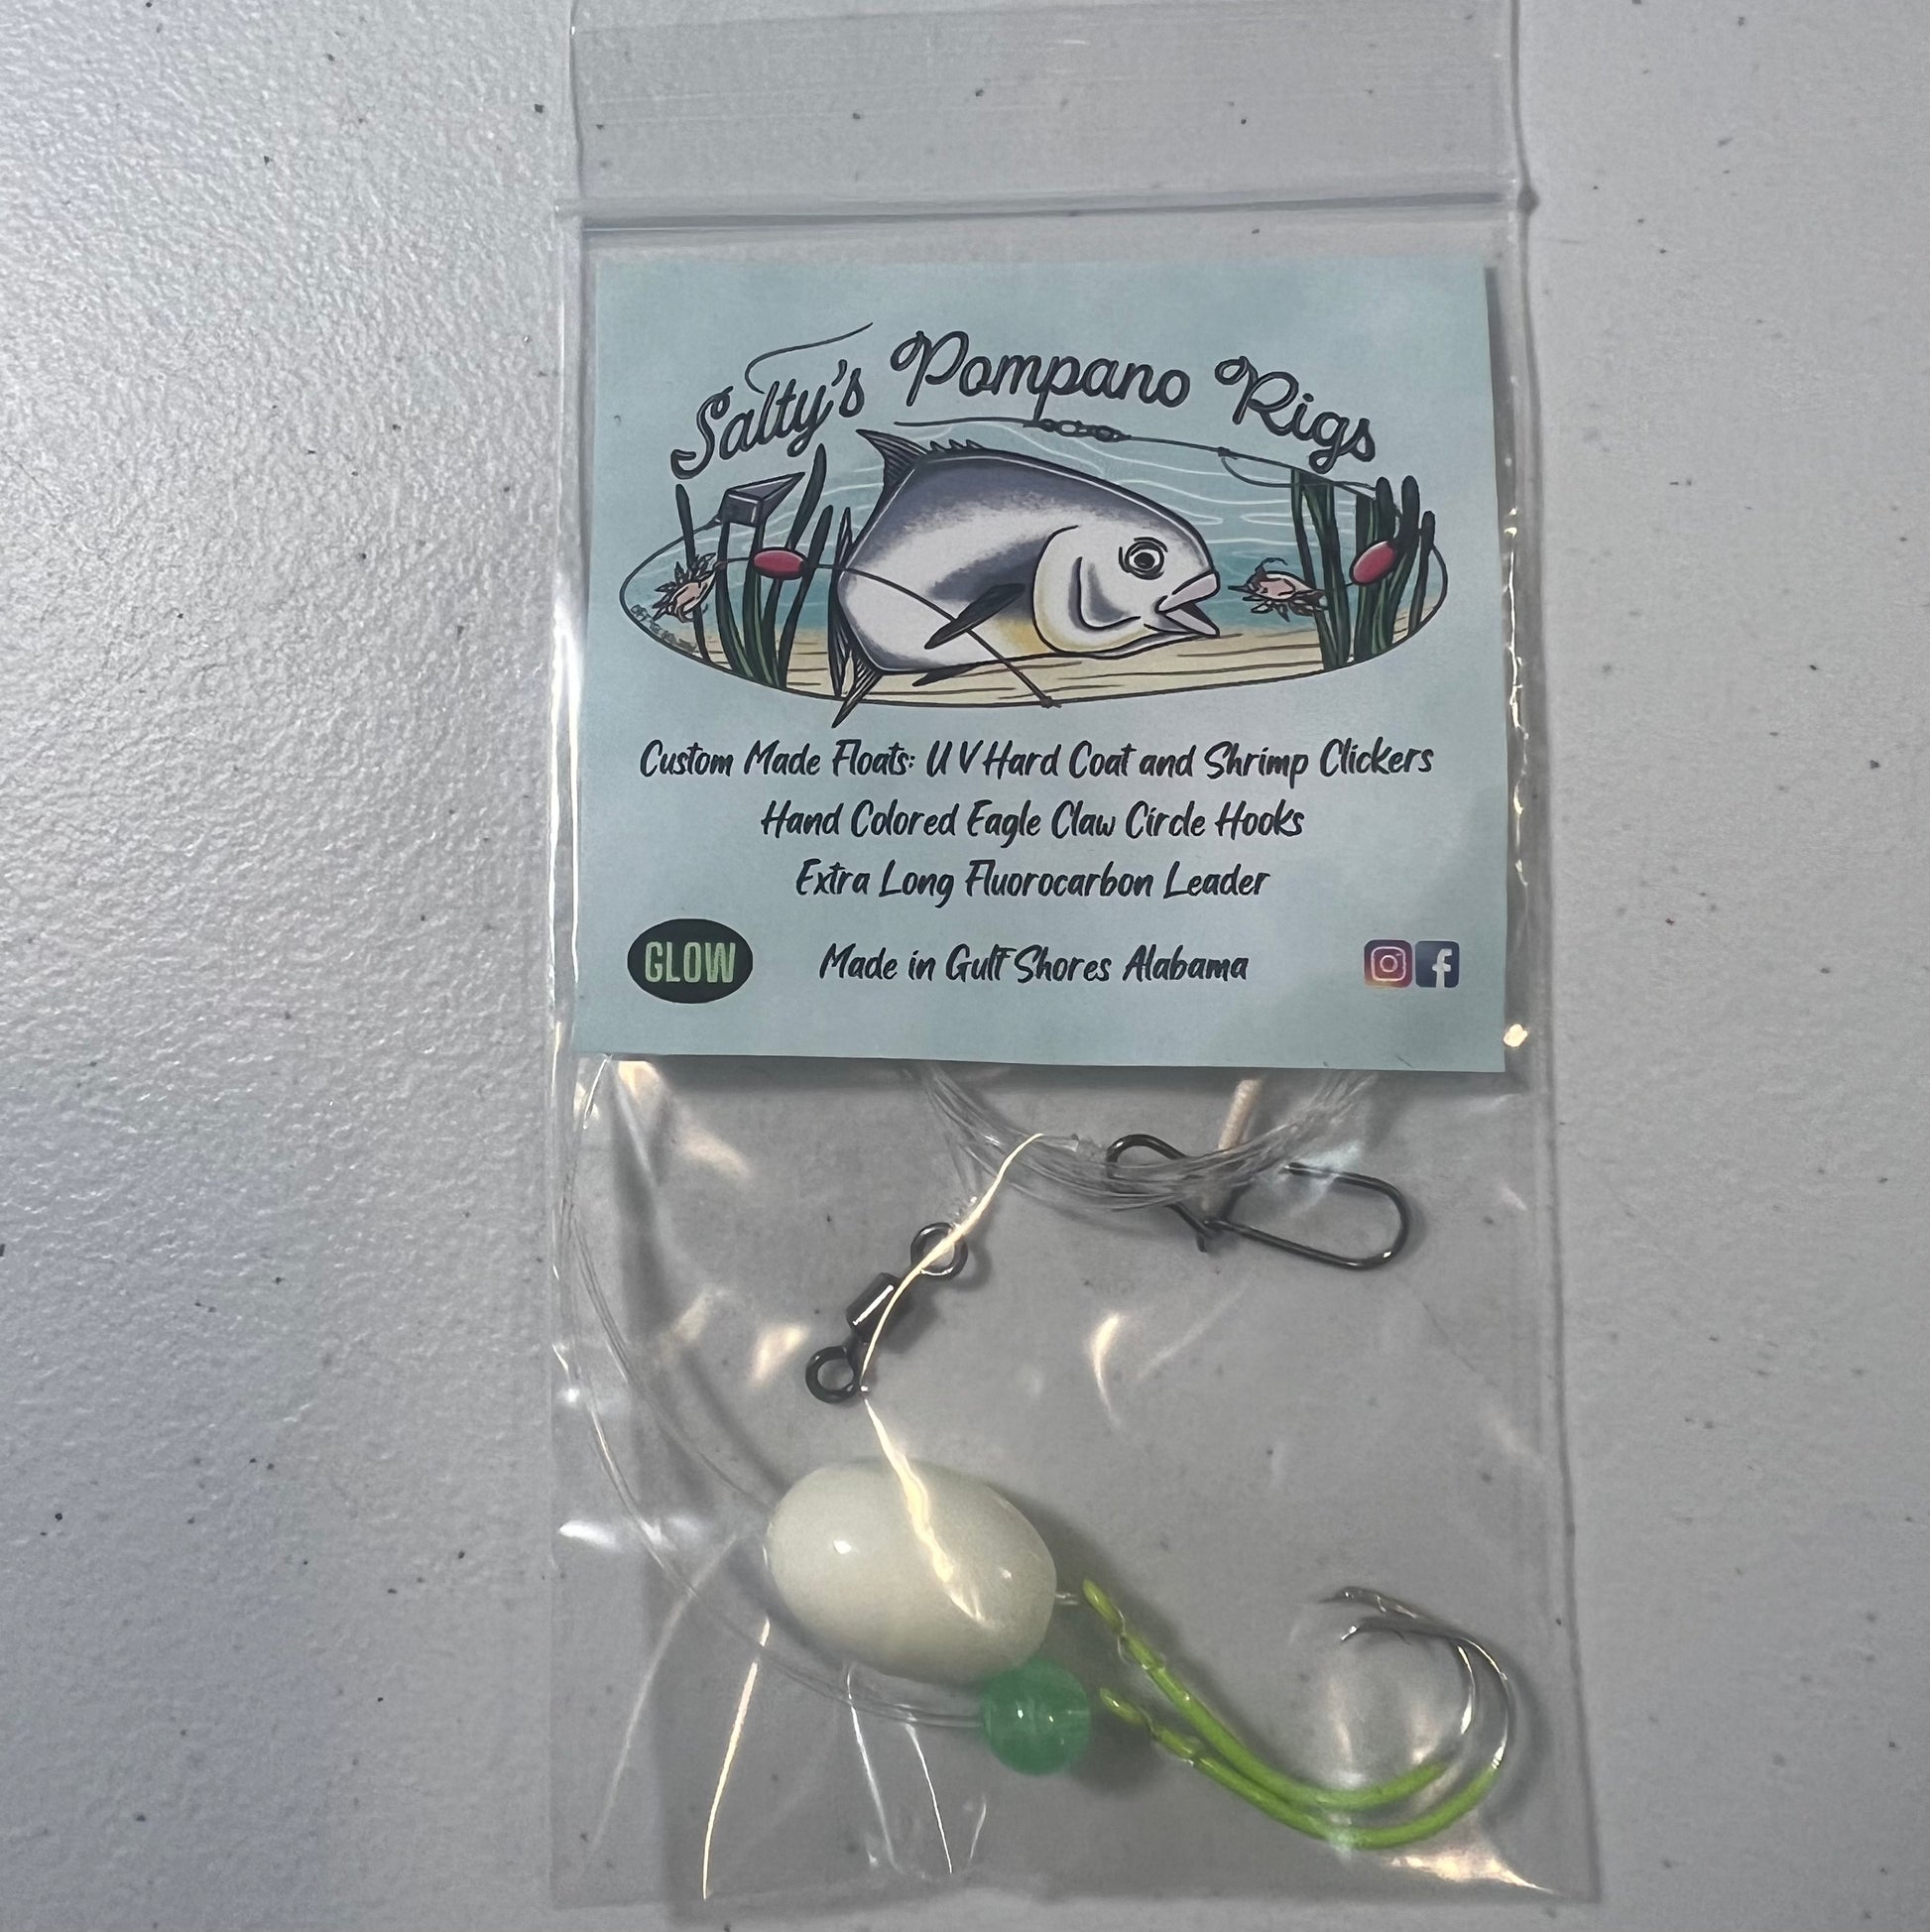 Salty's Pompano Rigs Duel Zone Double Drop Pompano Rig